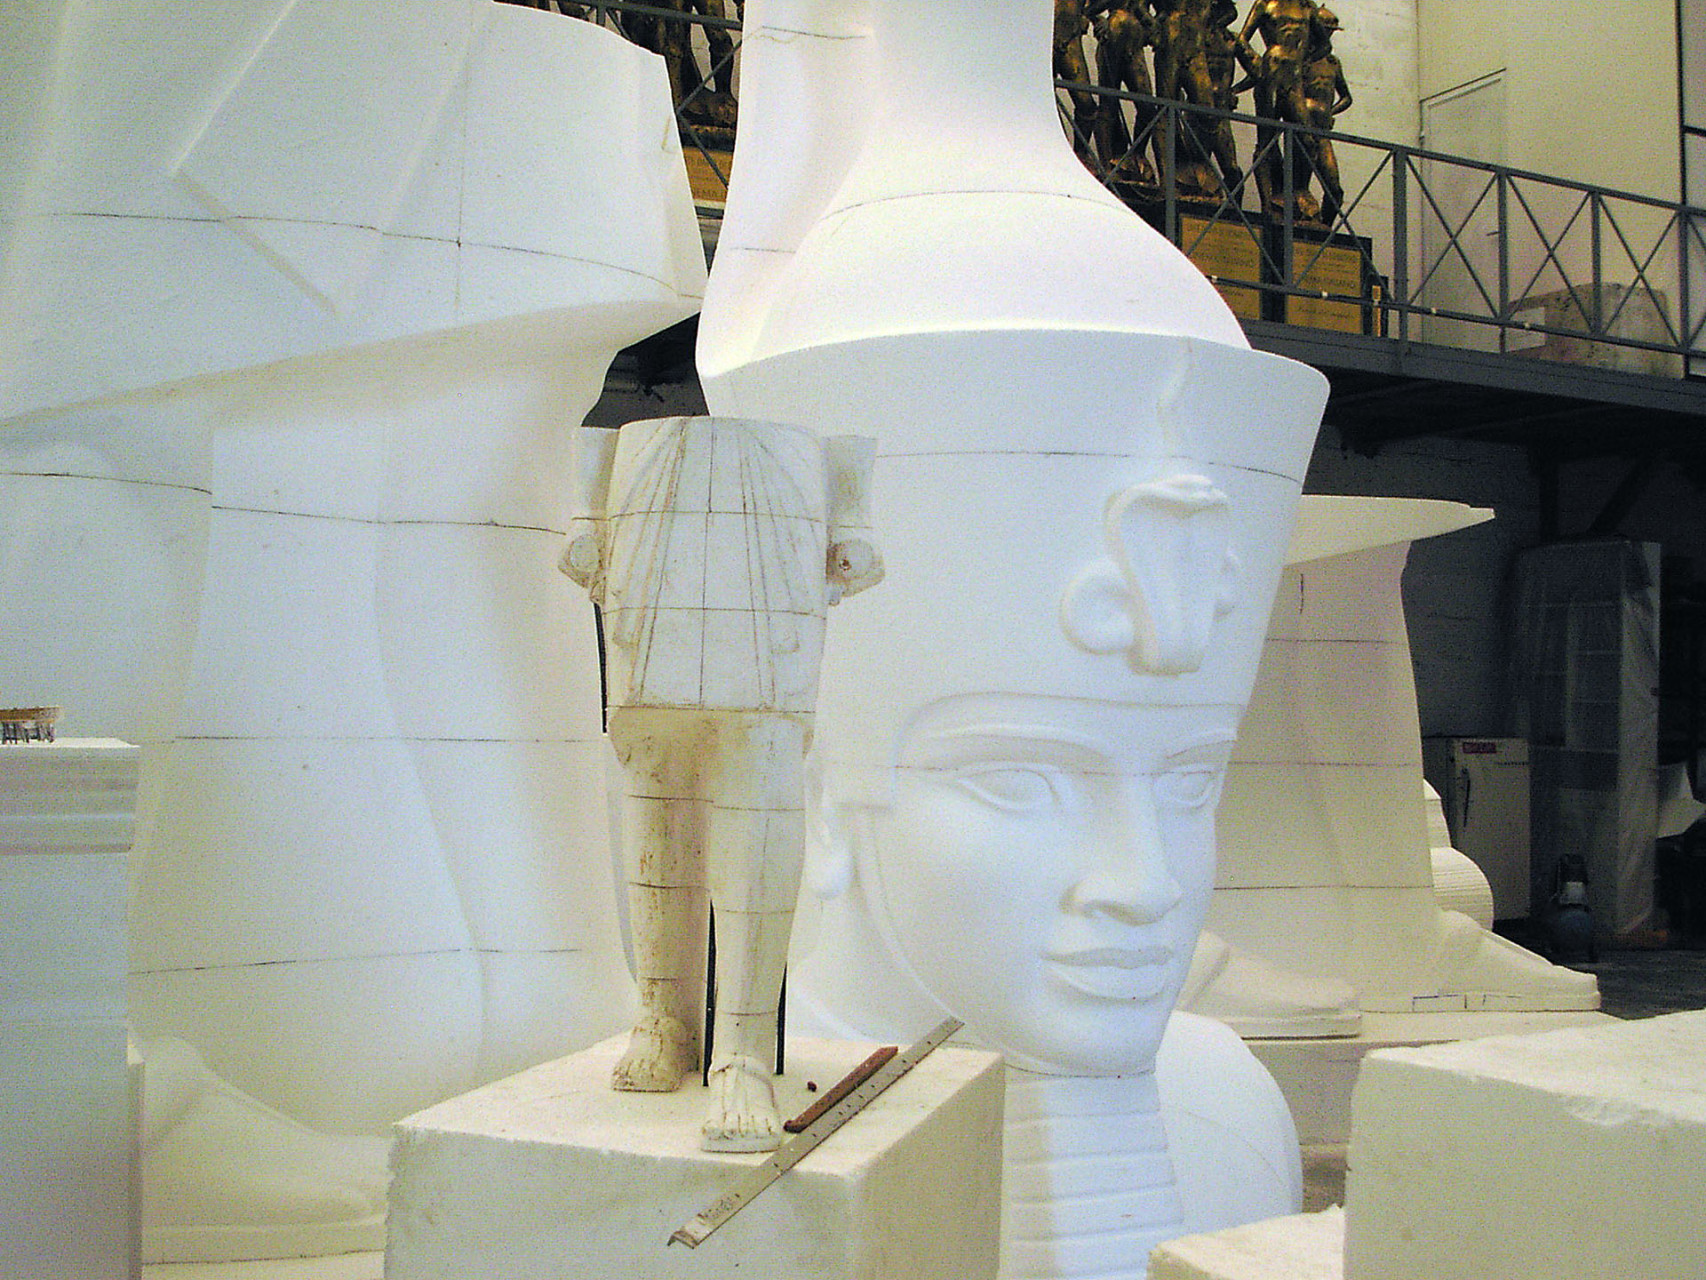 The model sliced to produce the sculptures